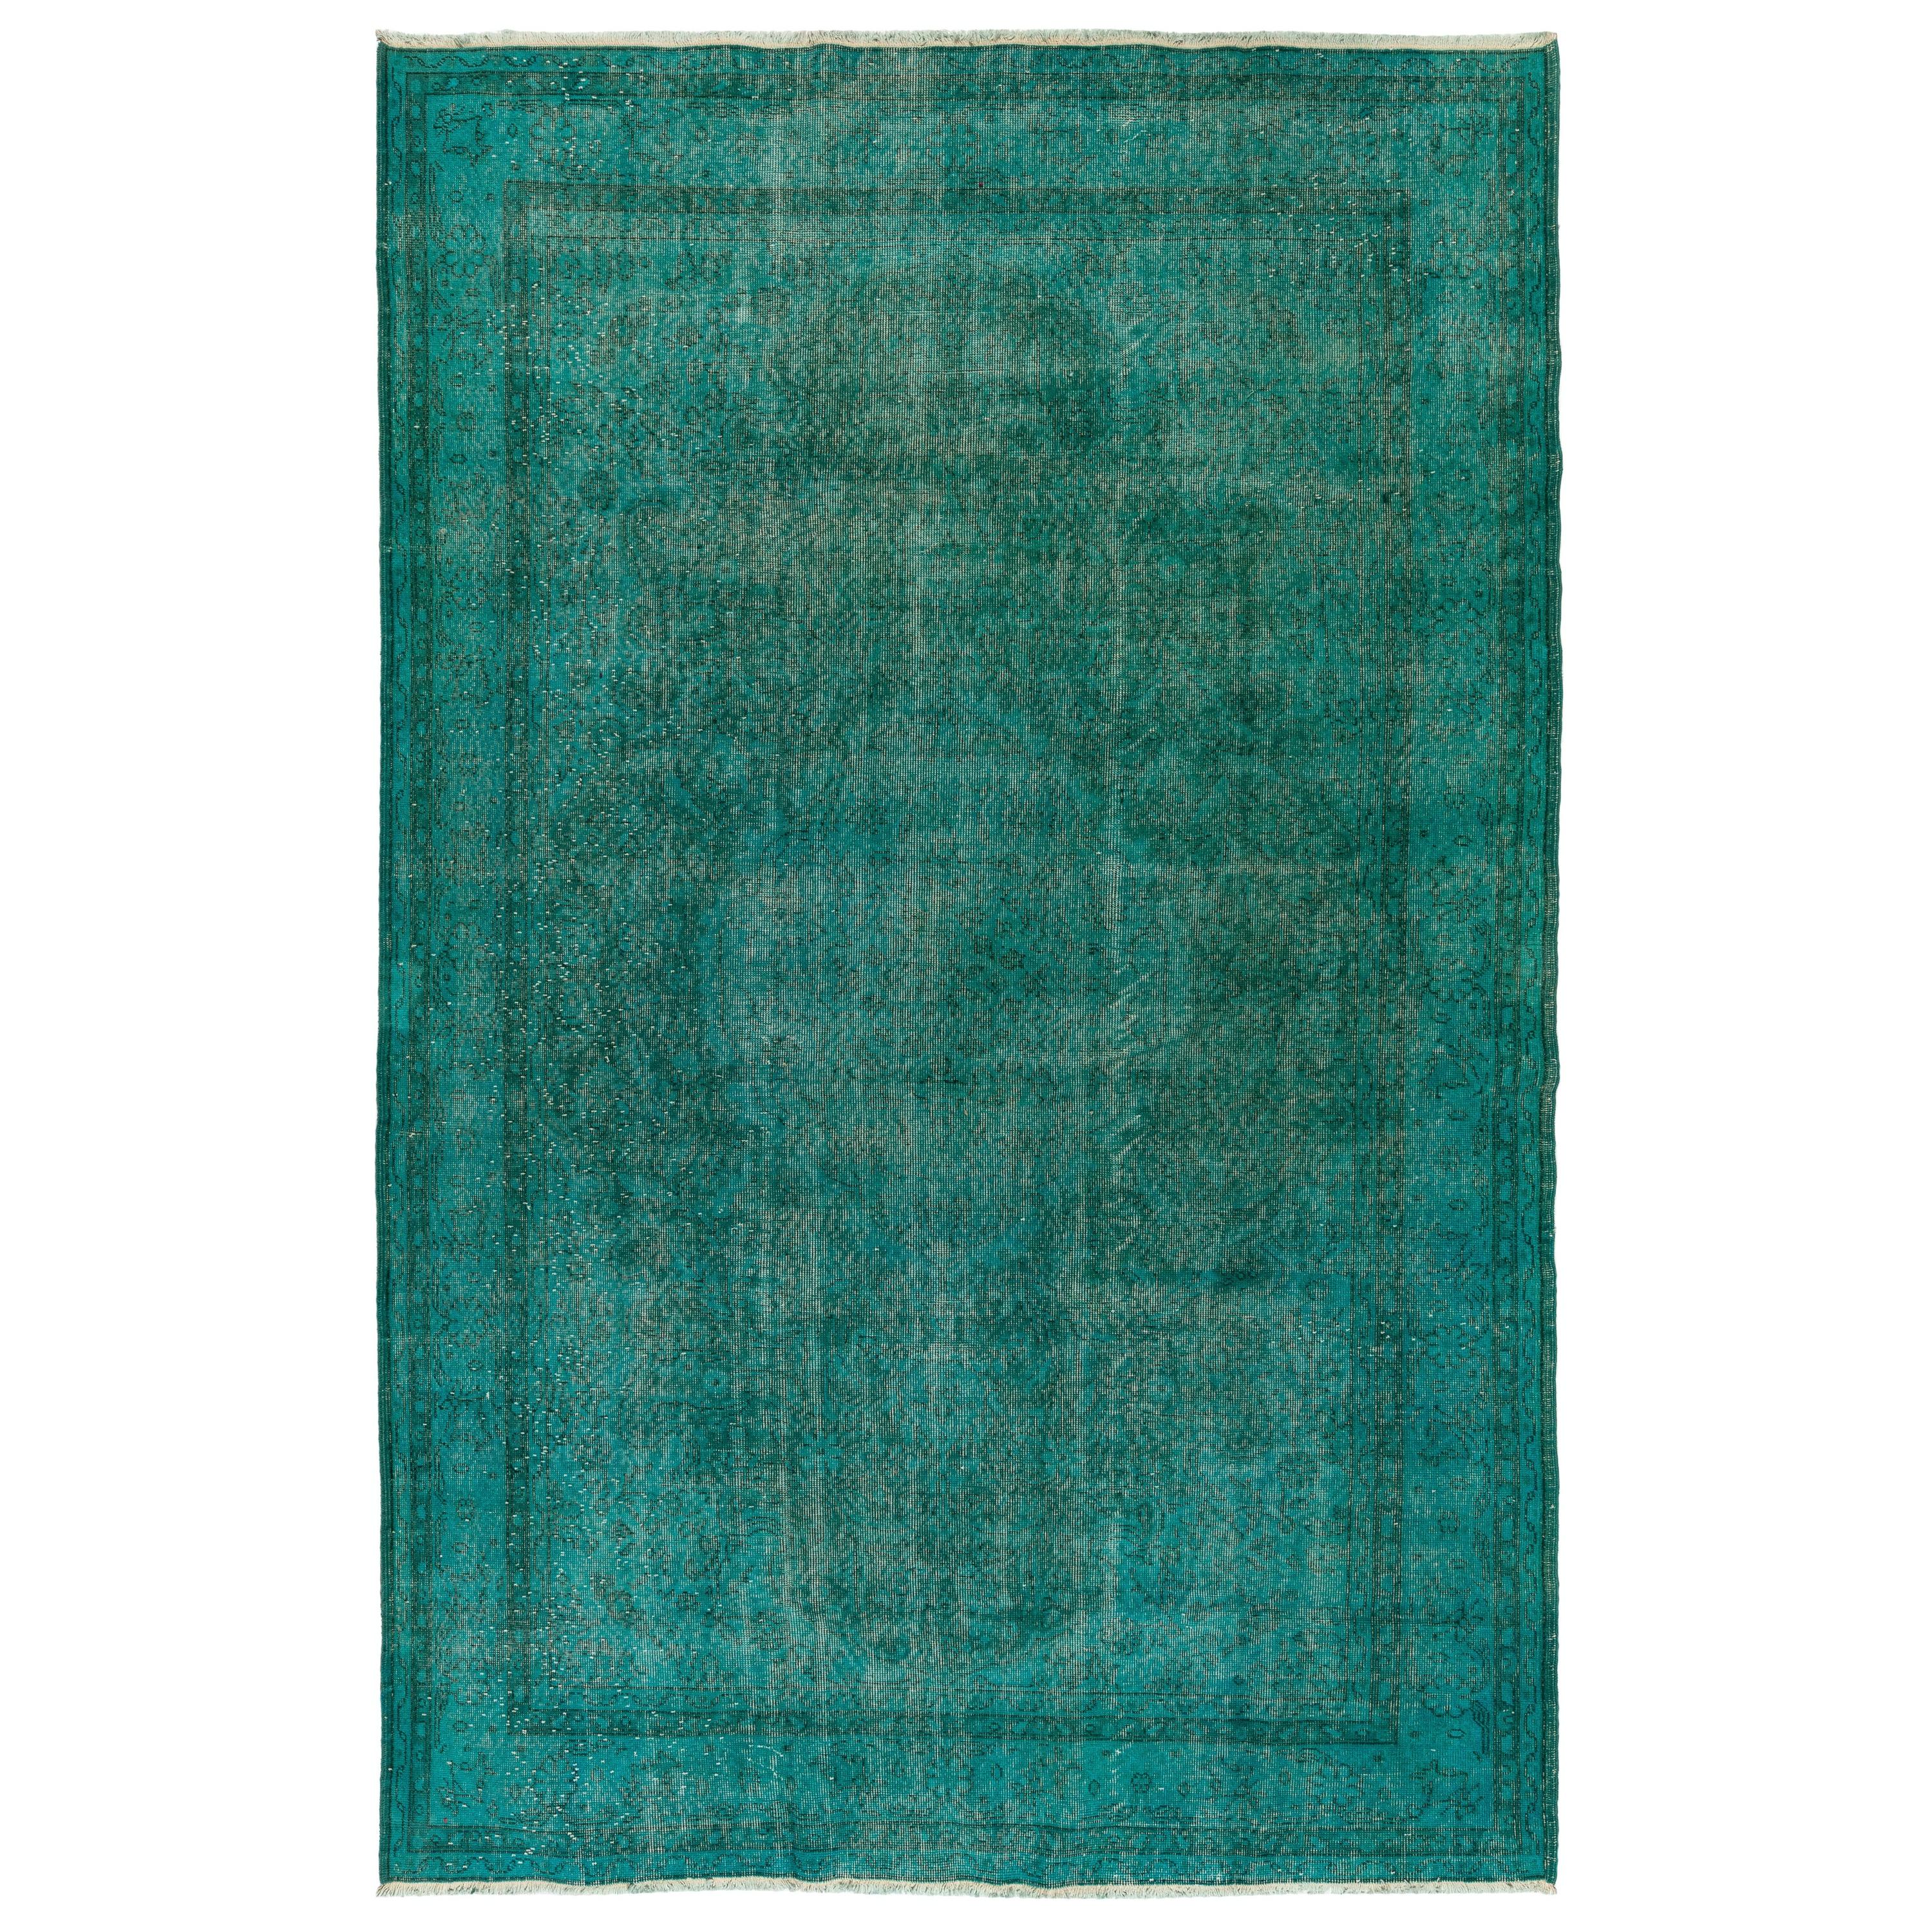 6.6x10.6 Ft Turquoise Blue Color ReDyed Vintage Turkish Rug for Modern Interiors